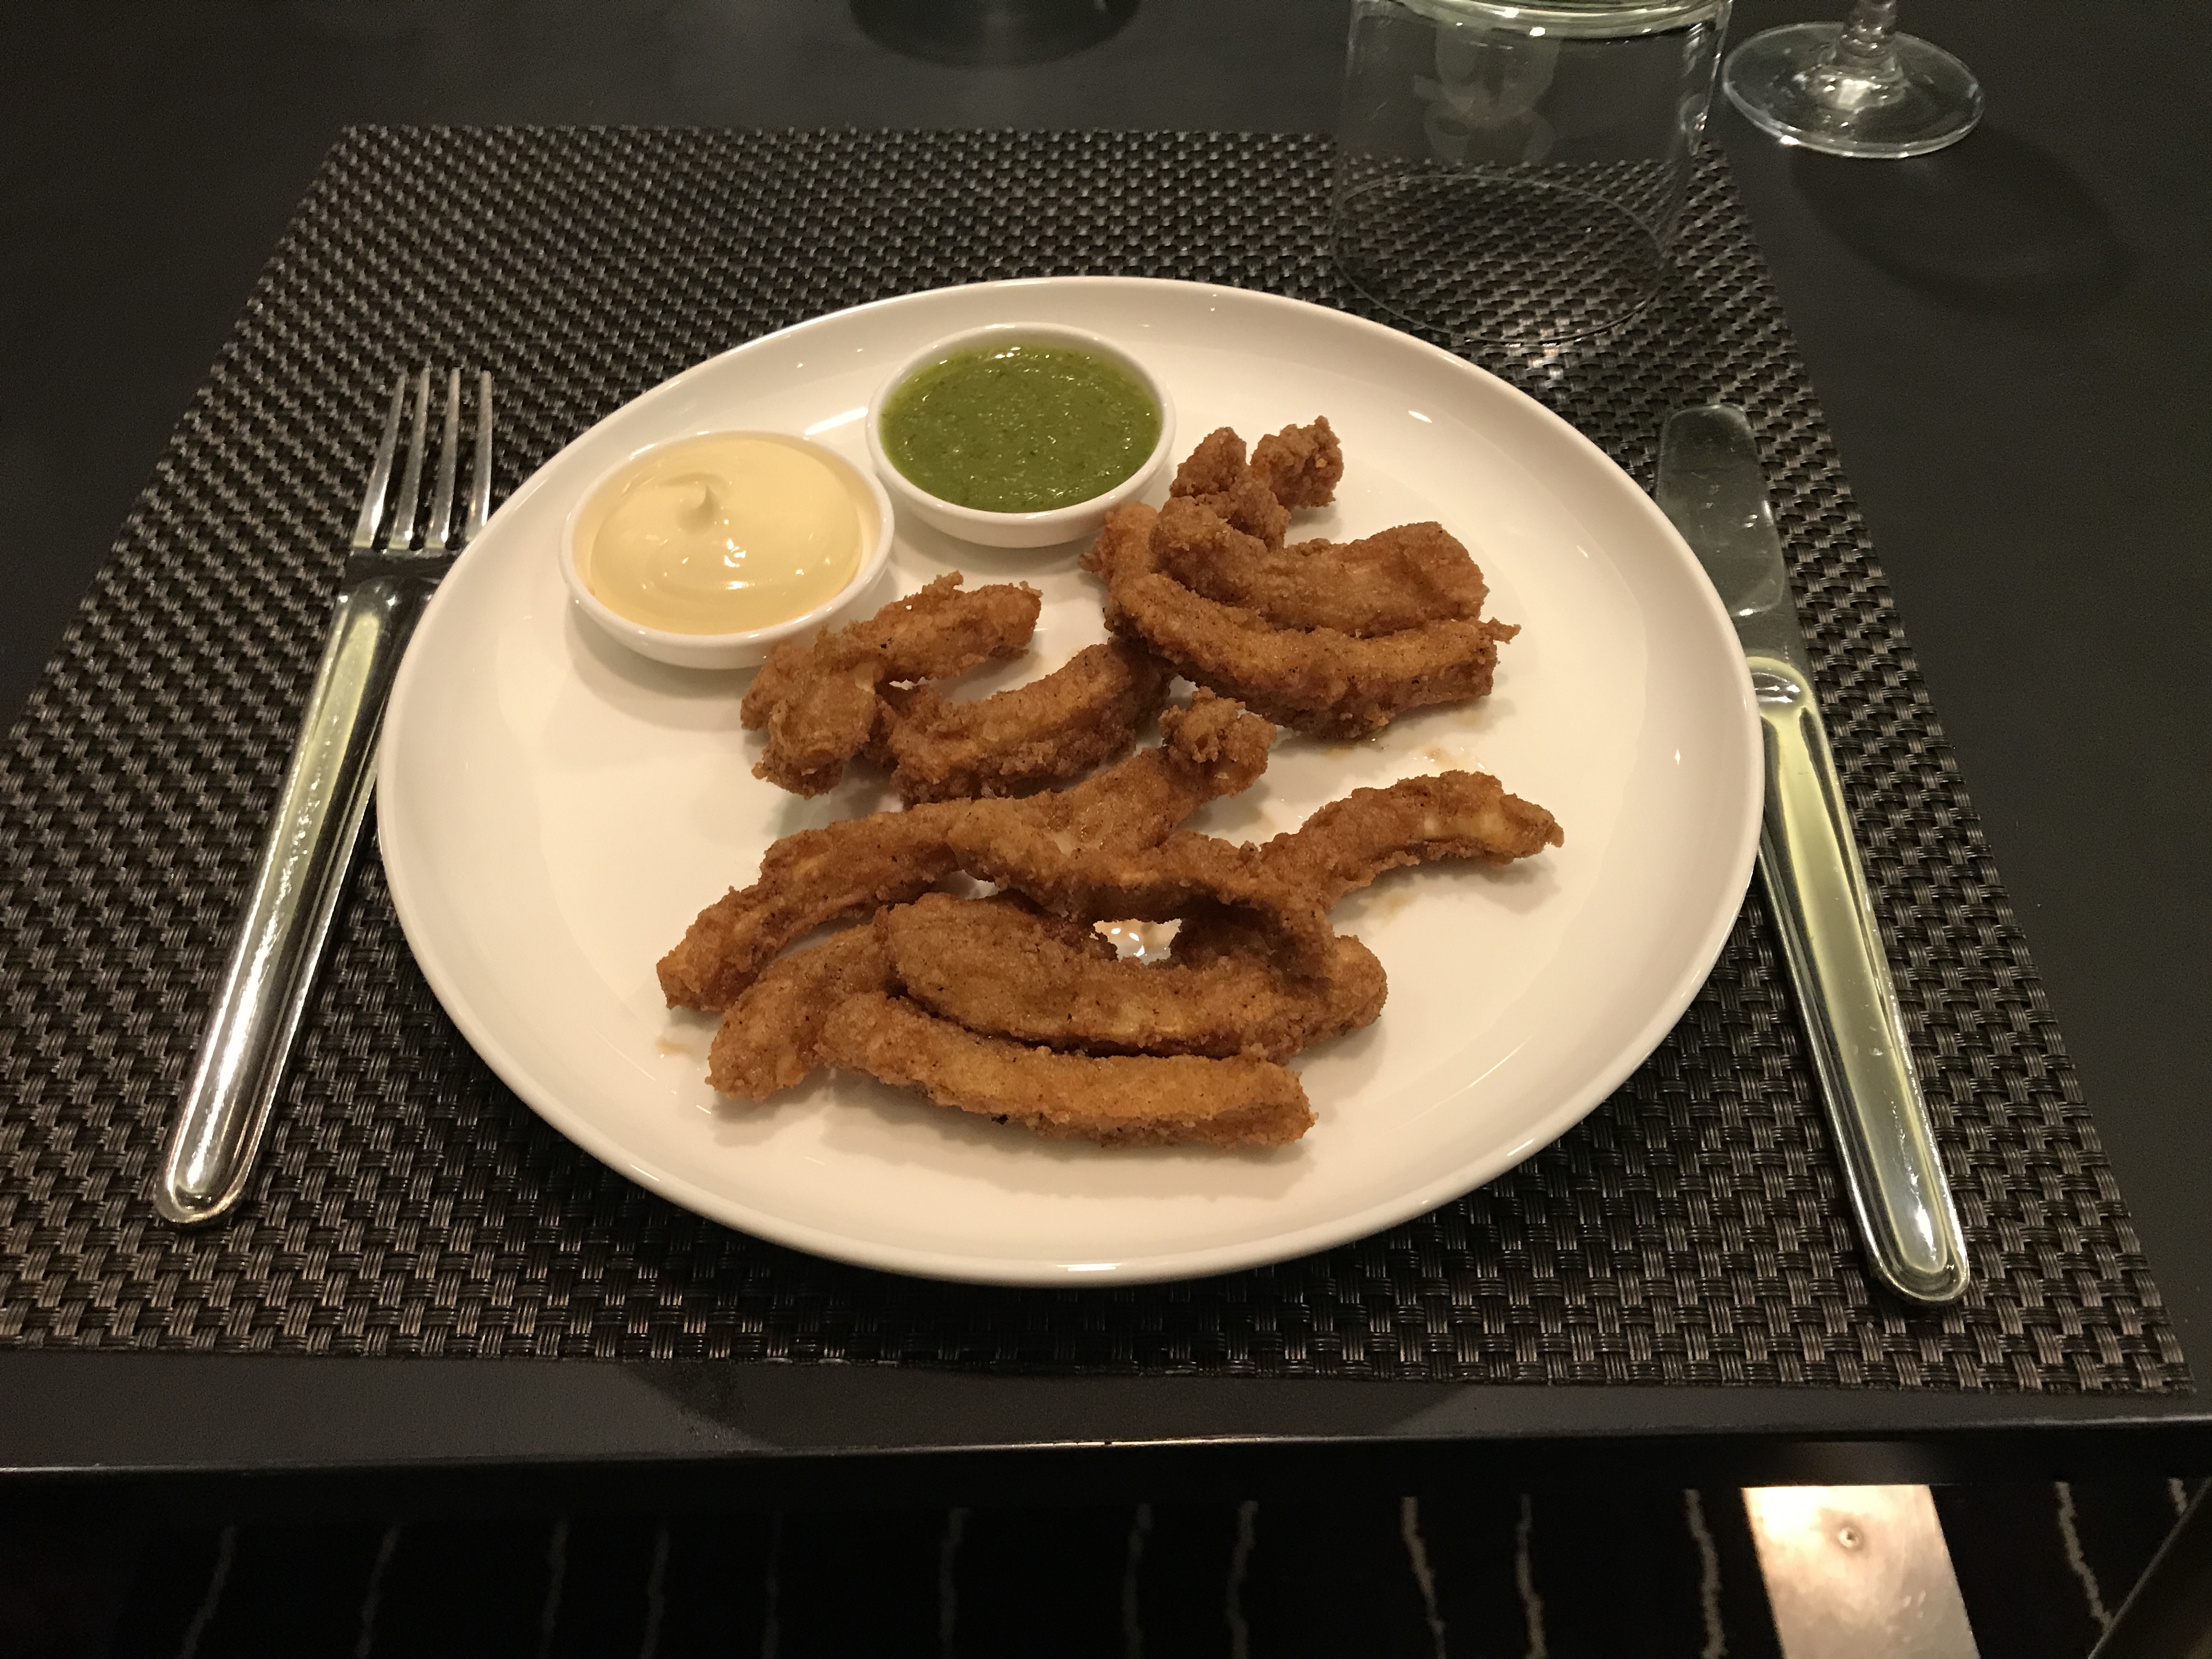 a plate of fried food with sauces on a place mat